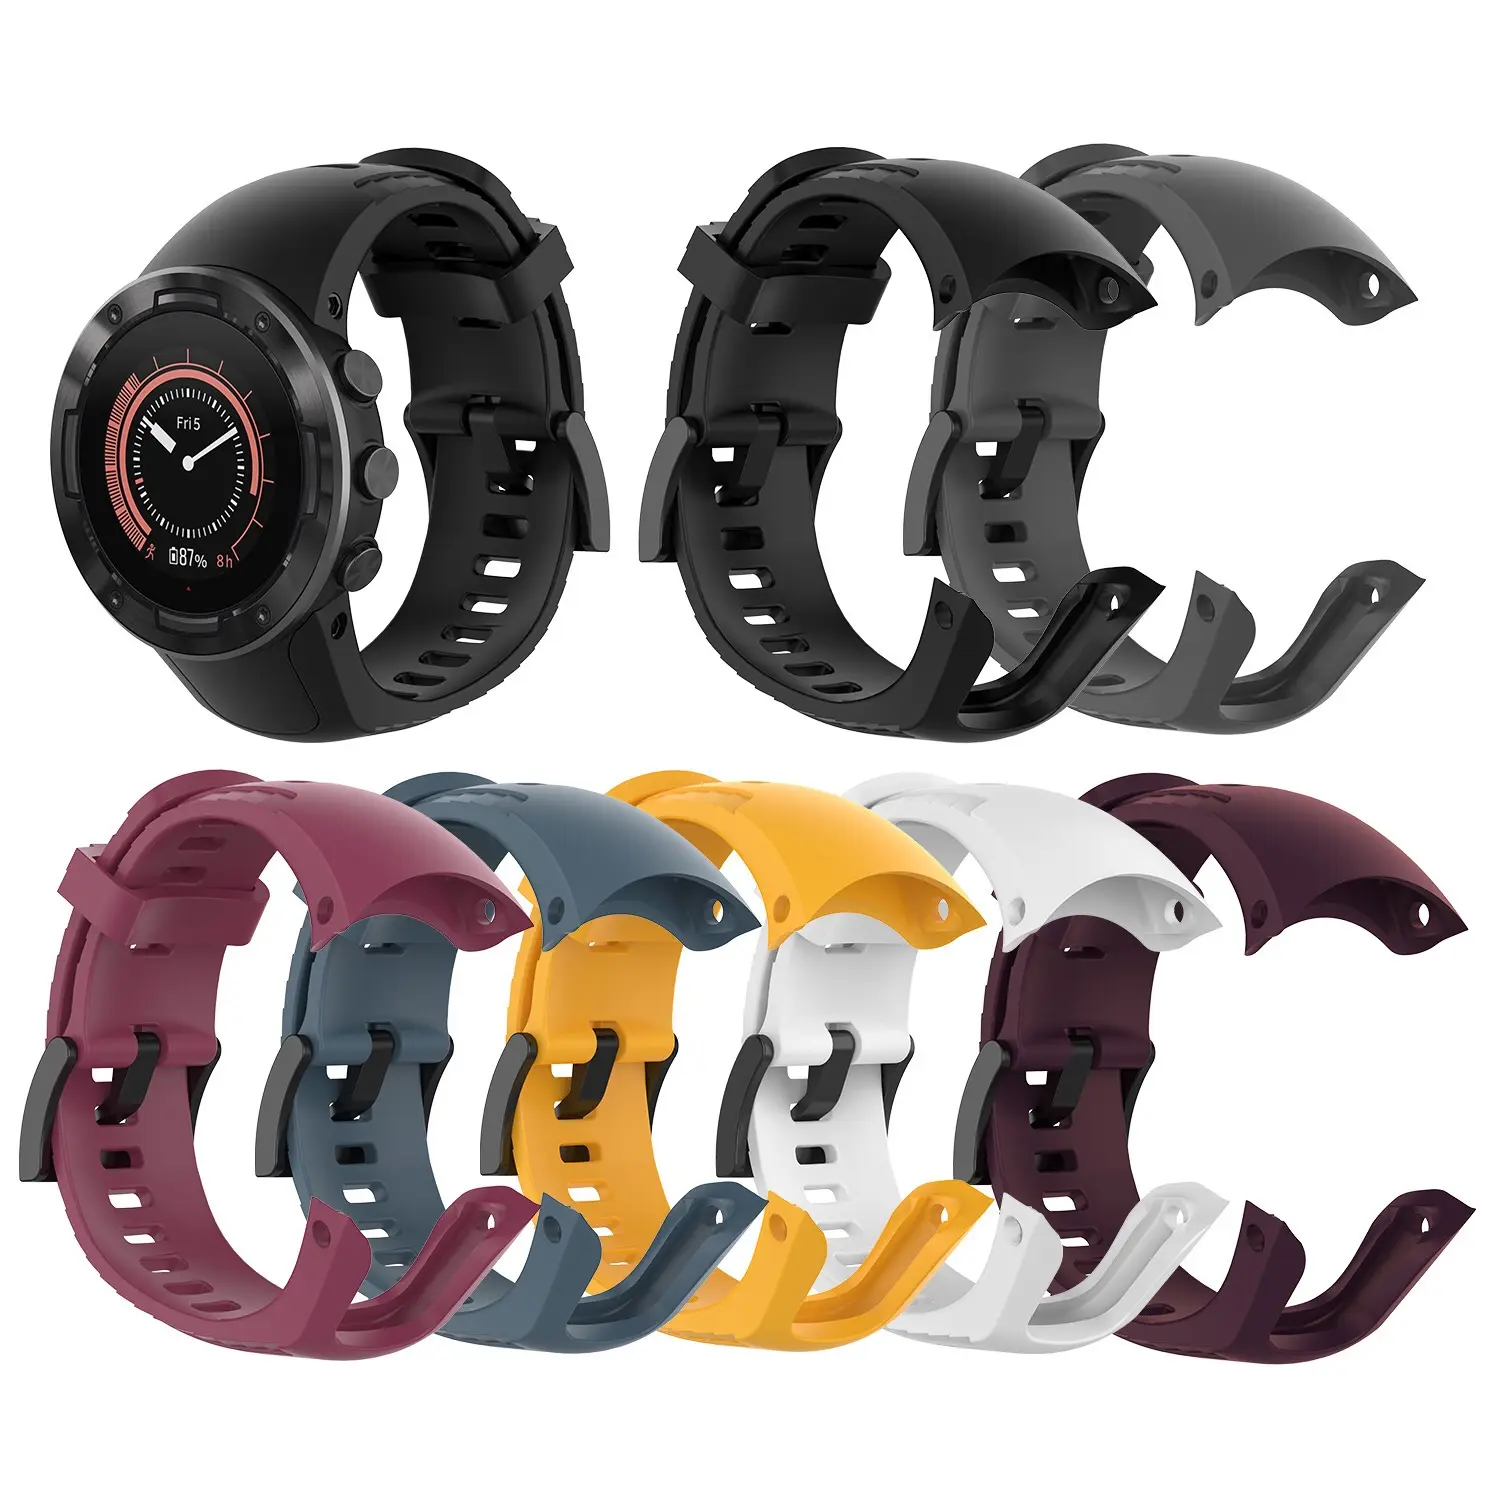 Silicone Rubber Adjustable Strap Wristband Replacement for SUUNTO 5 Smart Watch with Tools